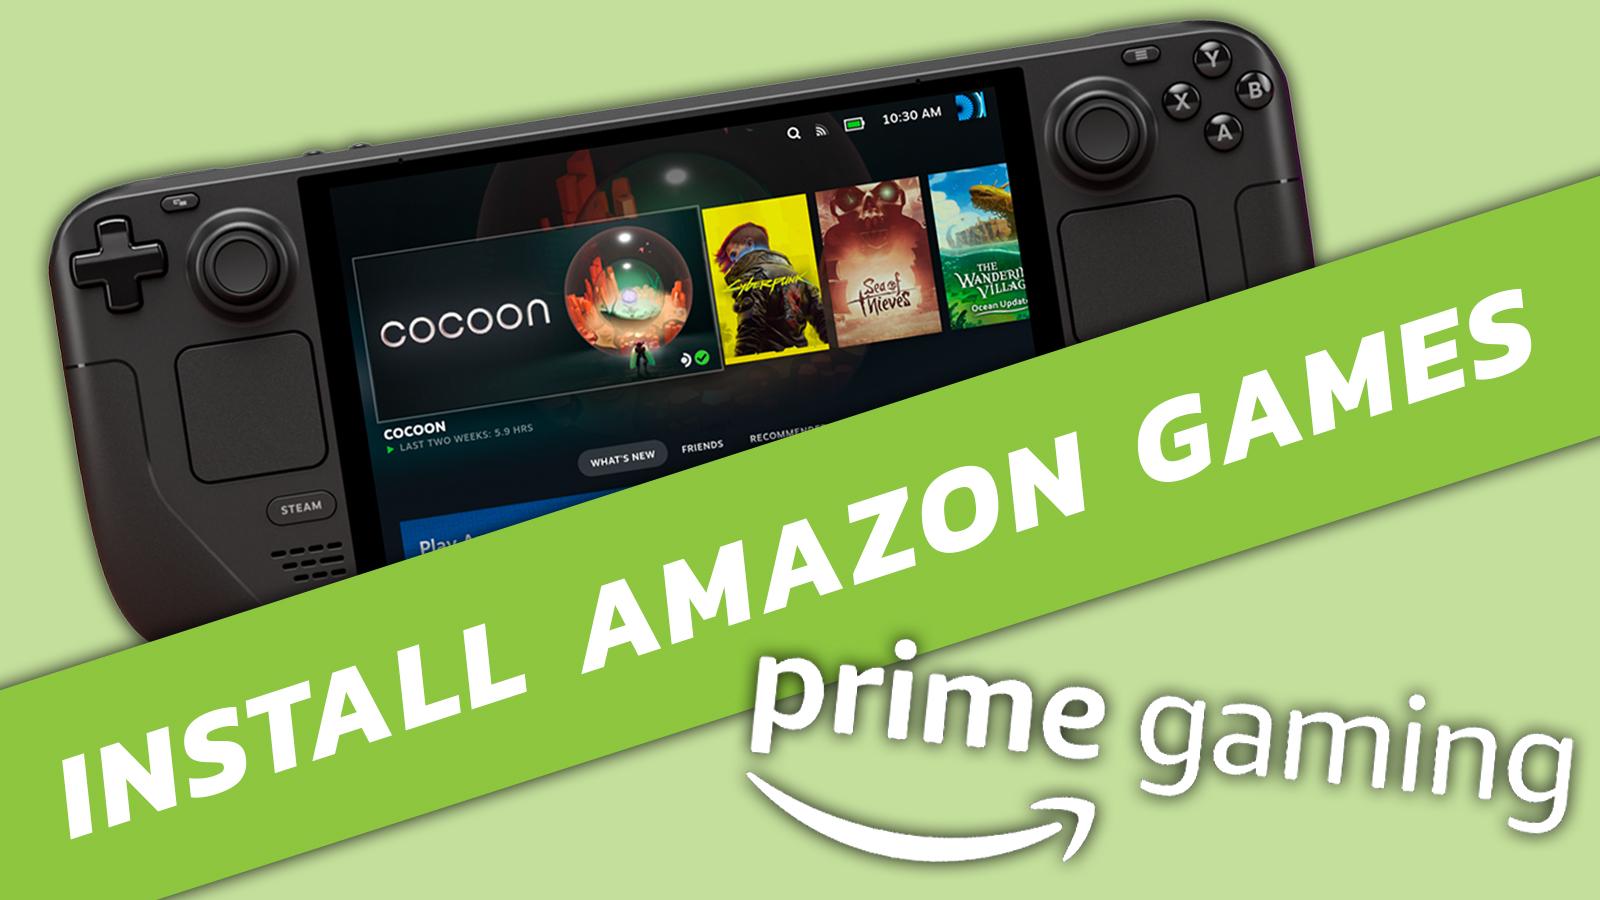 What is  Prime gaming and is it available in the UK?